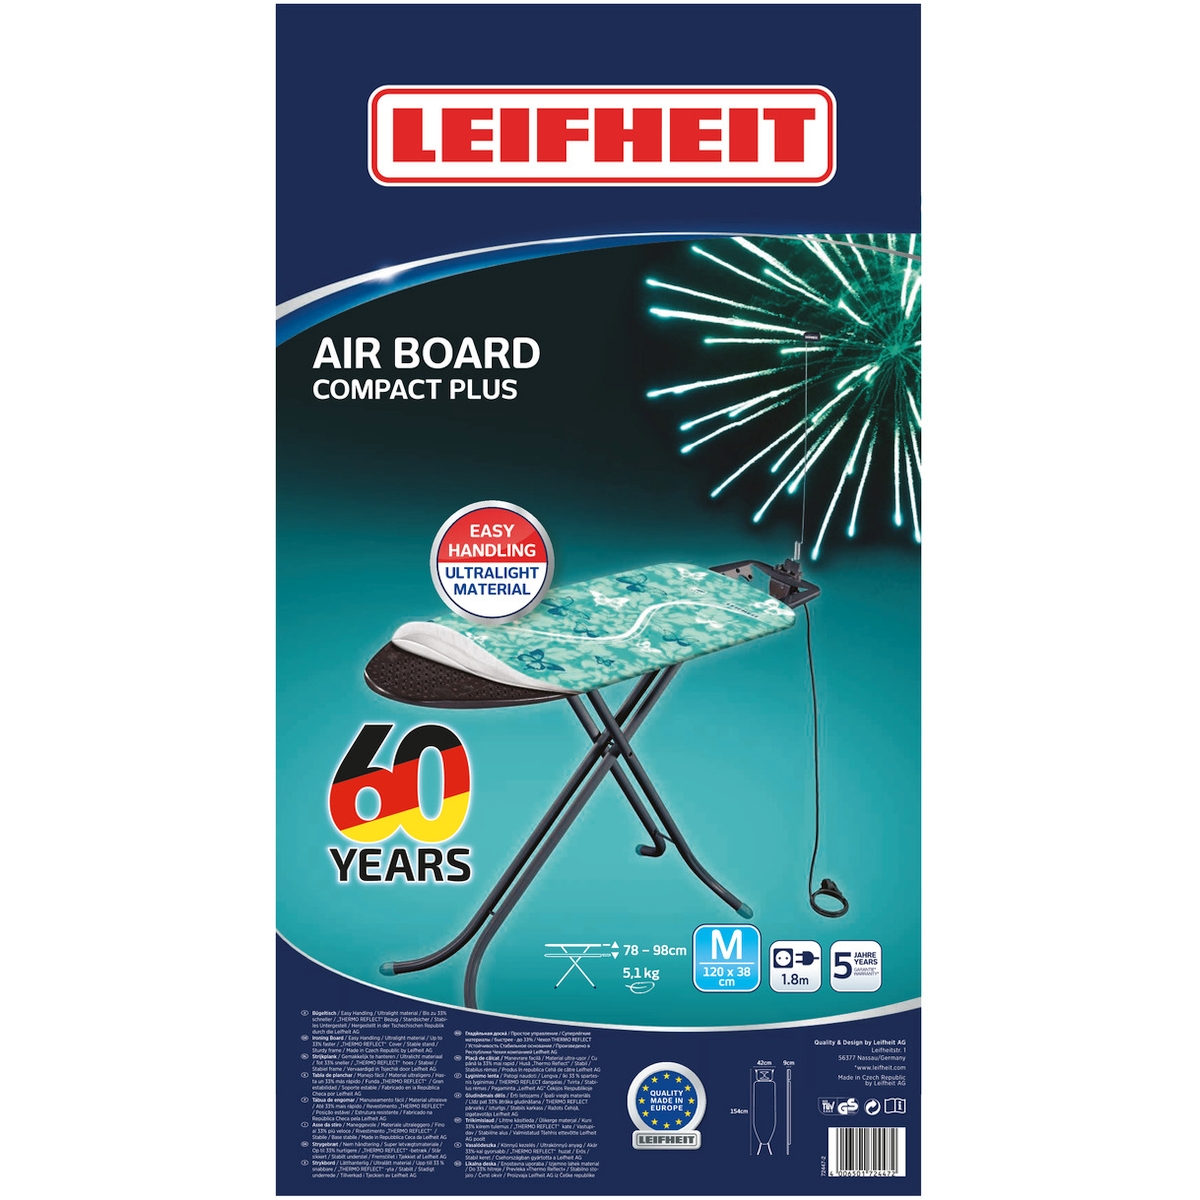   AirBoard Compact Plus M 60 Years Edition,  (Leifheit 72447)